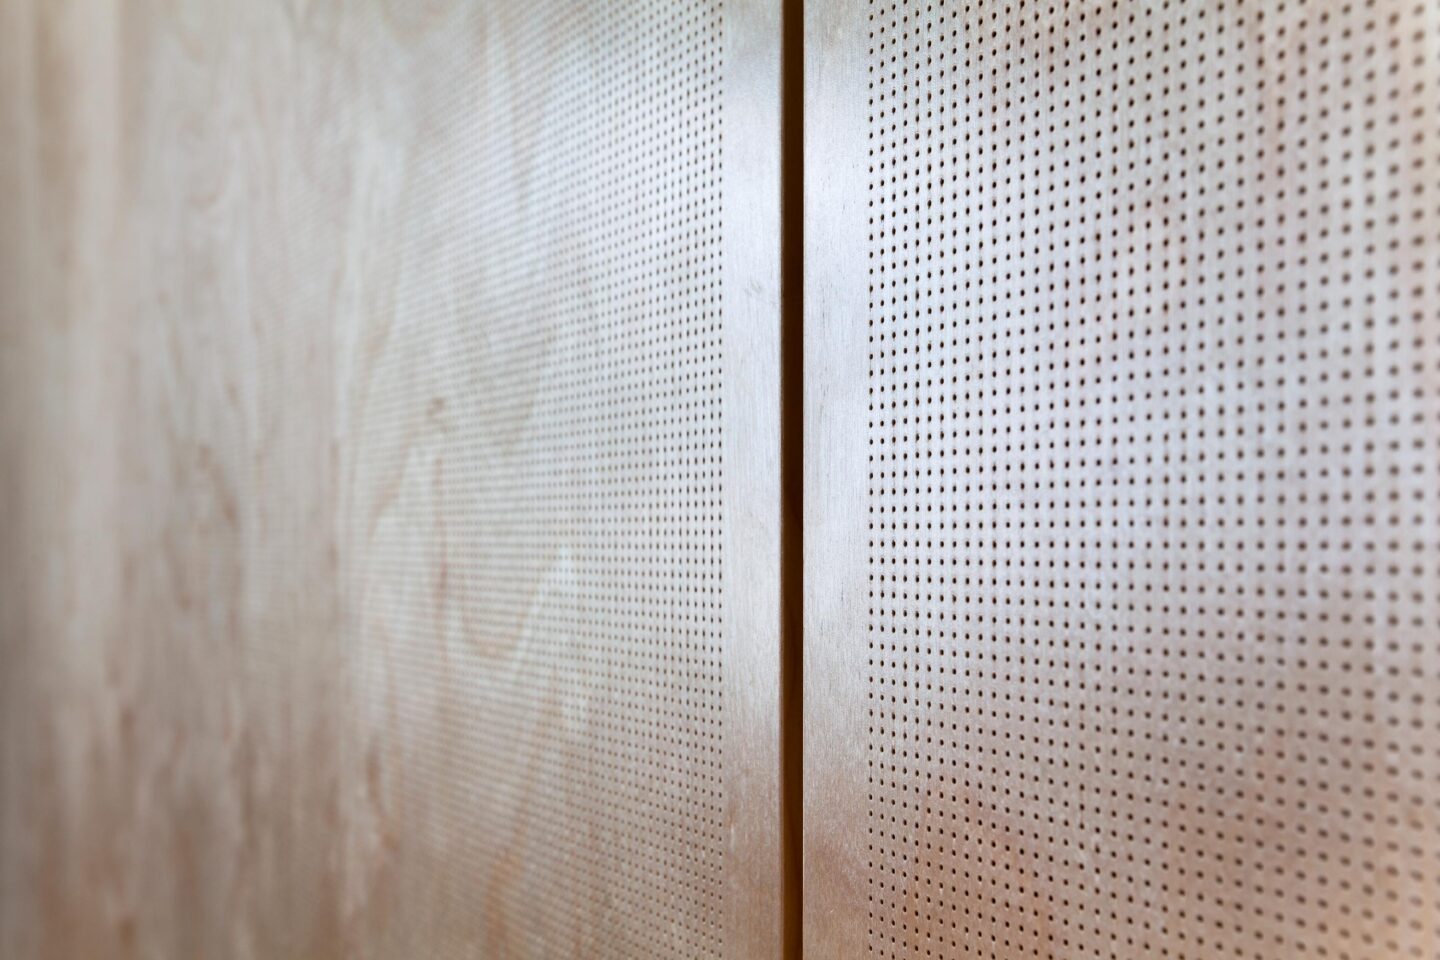 H Beck Verlag Munich │ system walls from feco │ coustically-effective wall panelling with micro-perforation